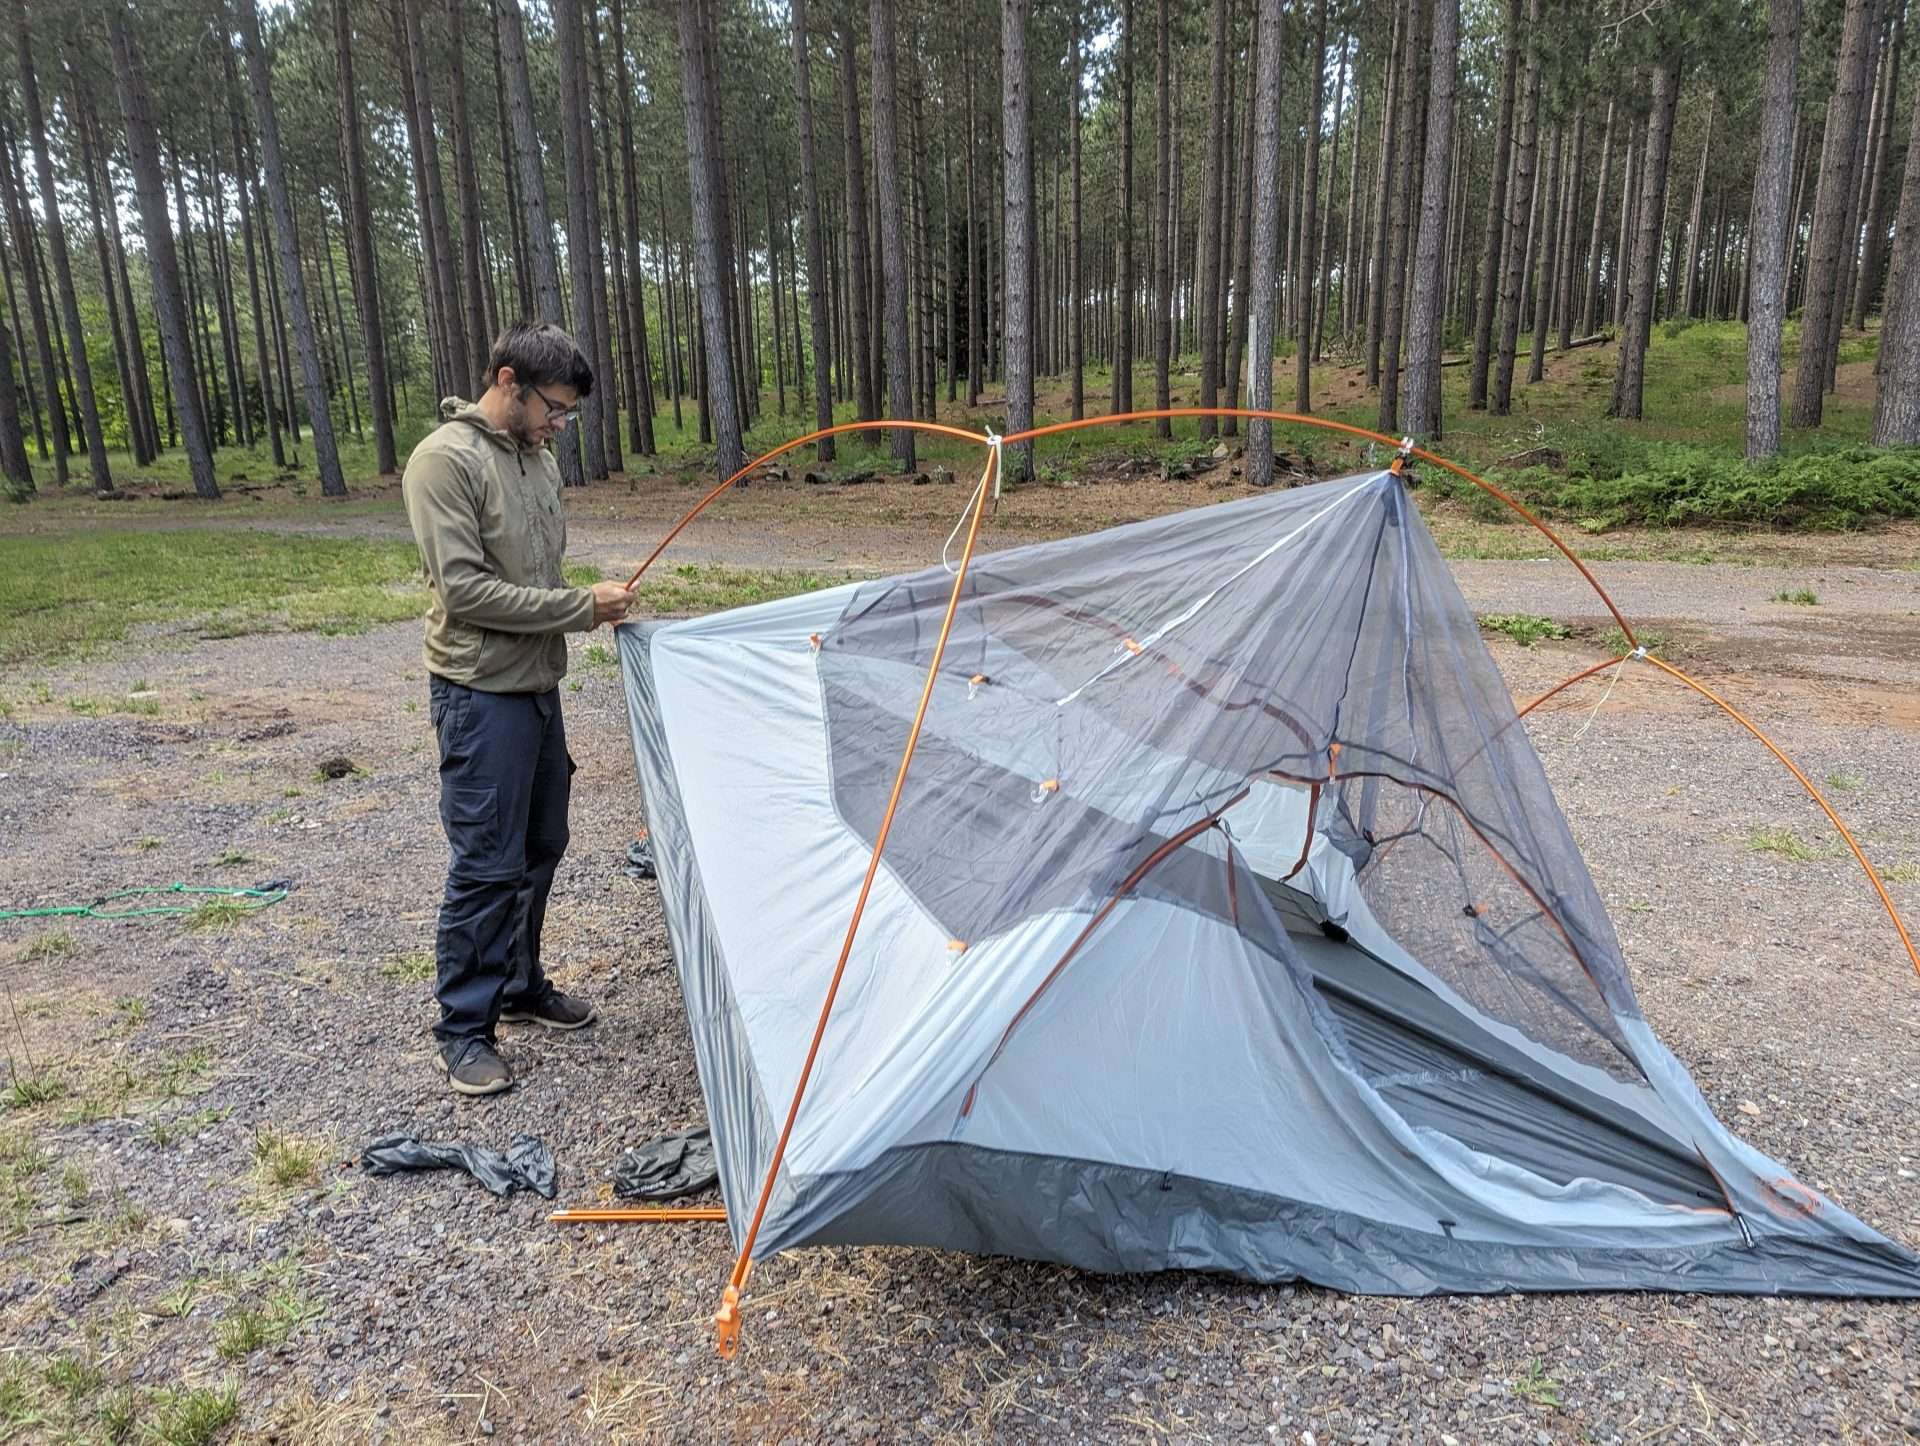 Setting up tent campsite